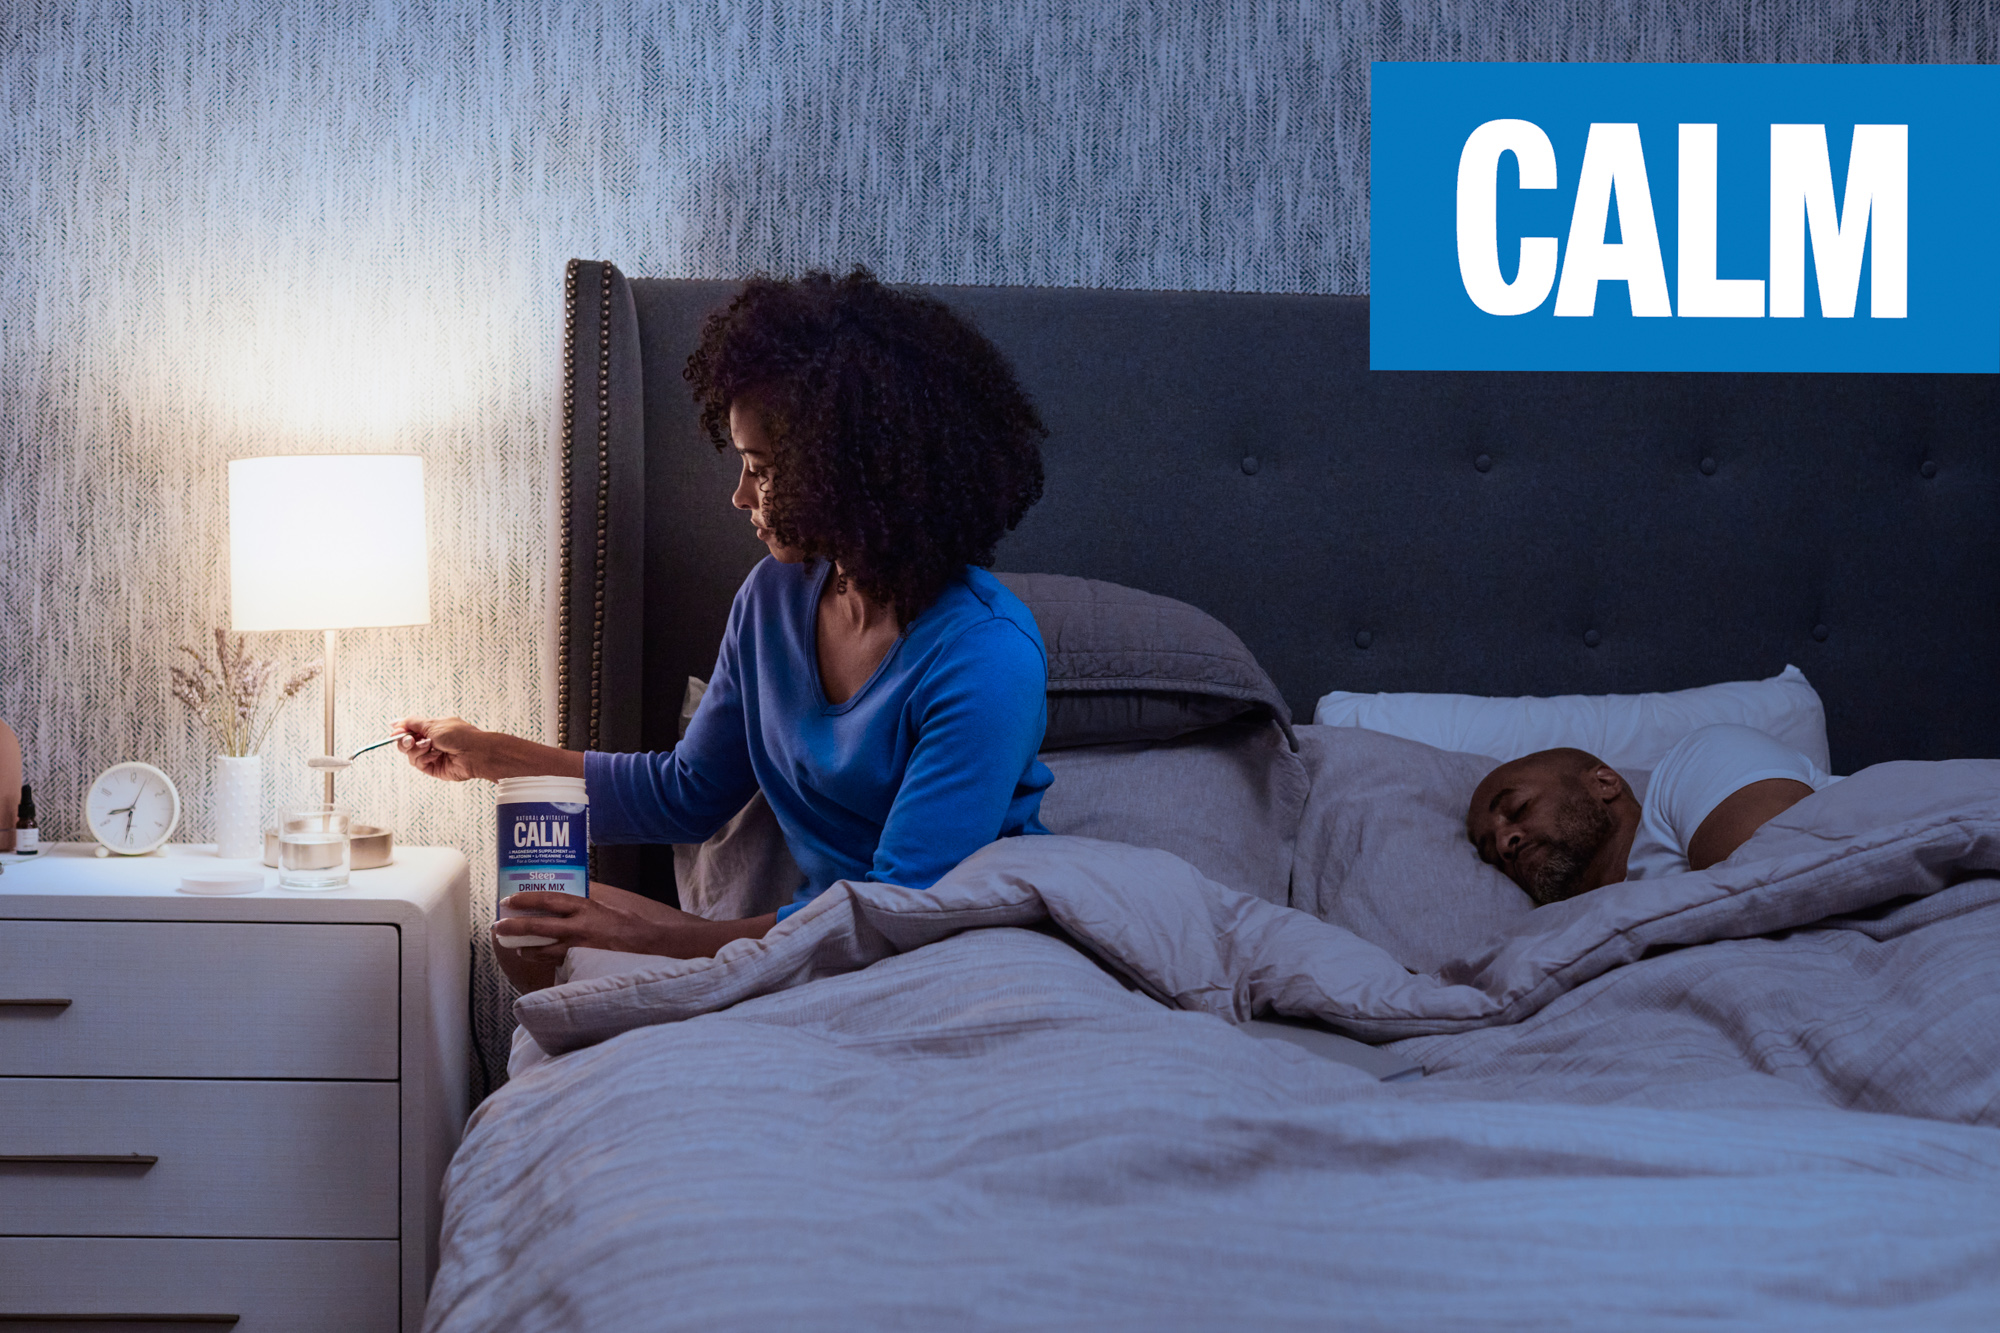 A couple takes supplements before bed in a Calm Ad Campaign photographed by Lifestyle Photographer Diana Mulvihill